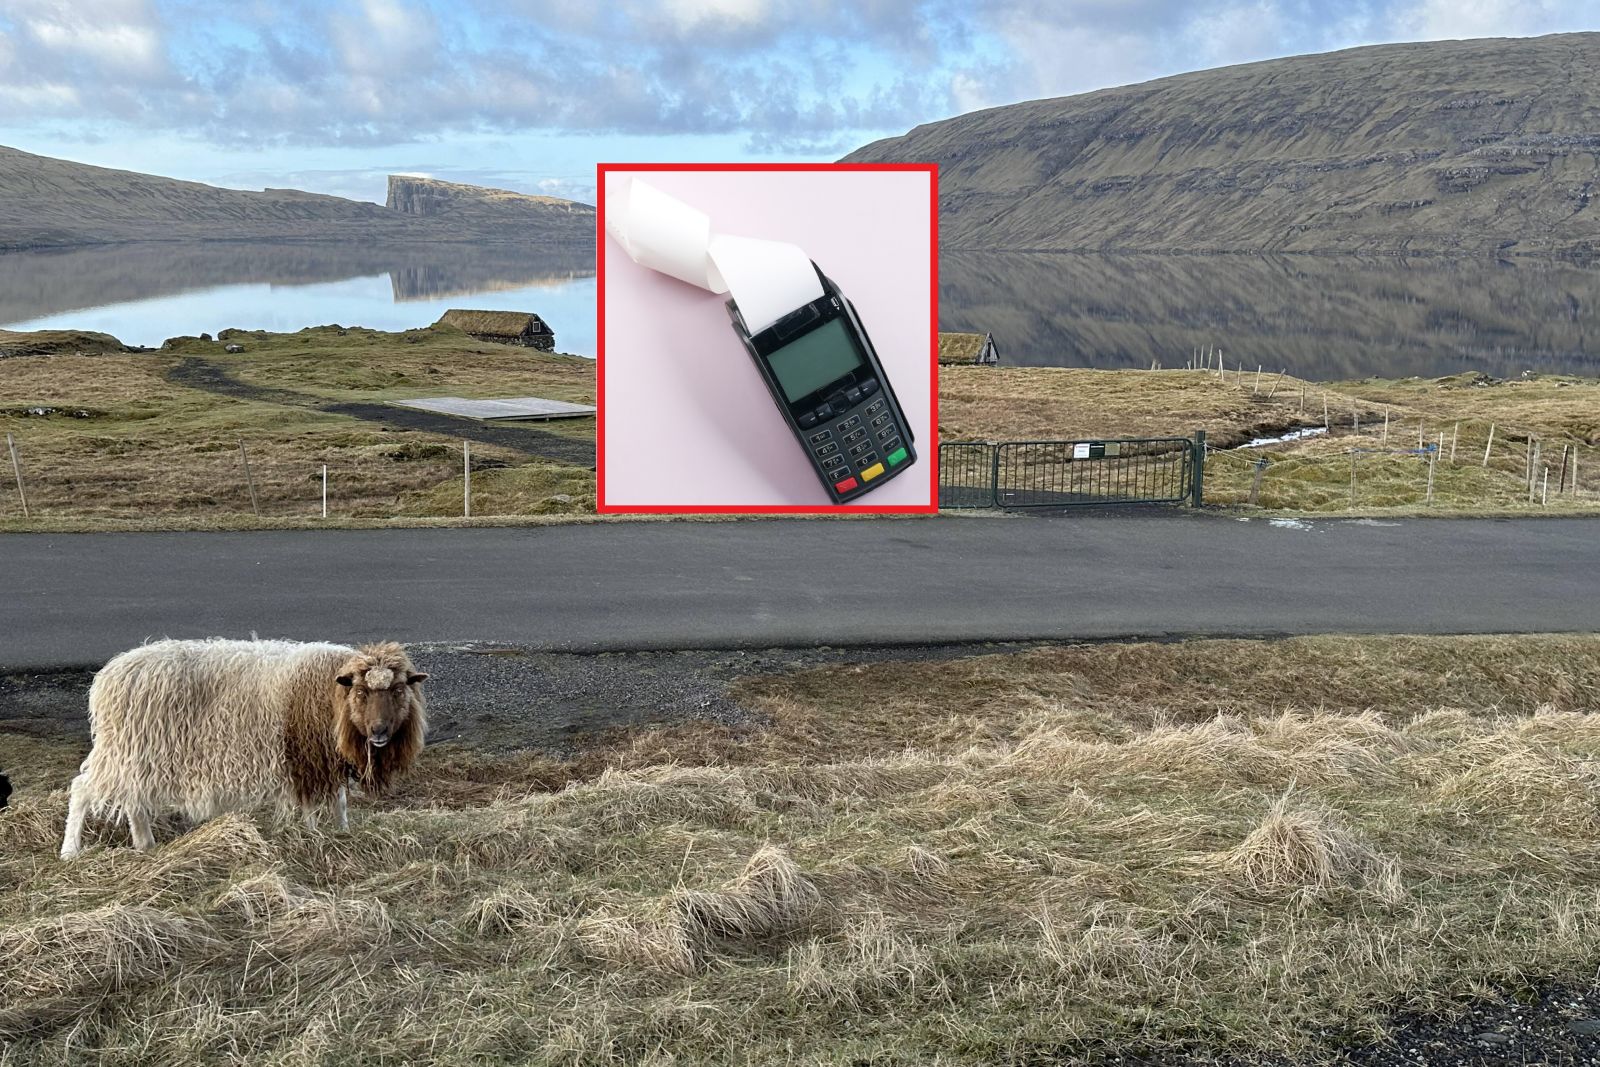 Prices in the Faroe Islands are astronomical.  Show “Horror Receipt” – O2